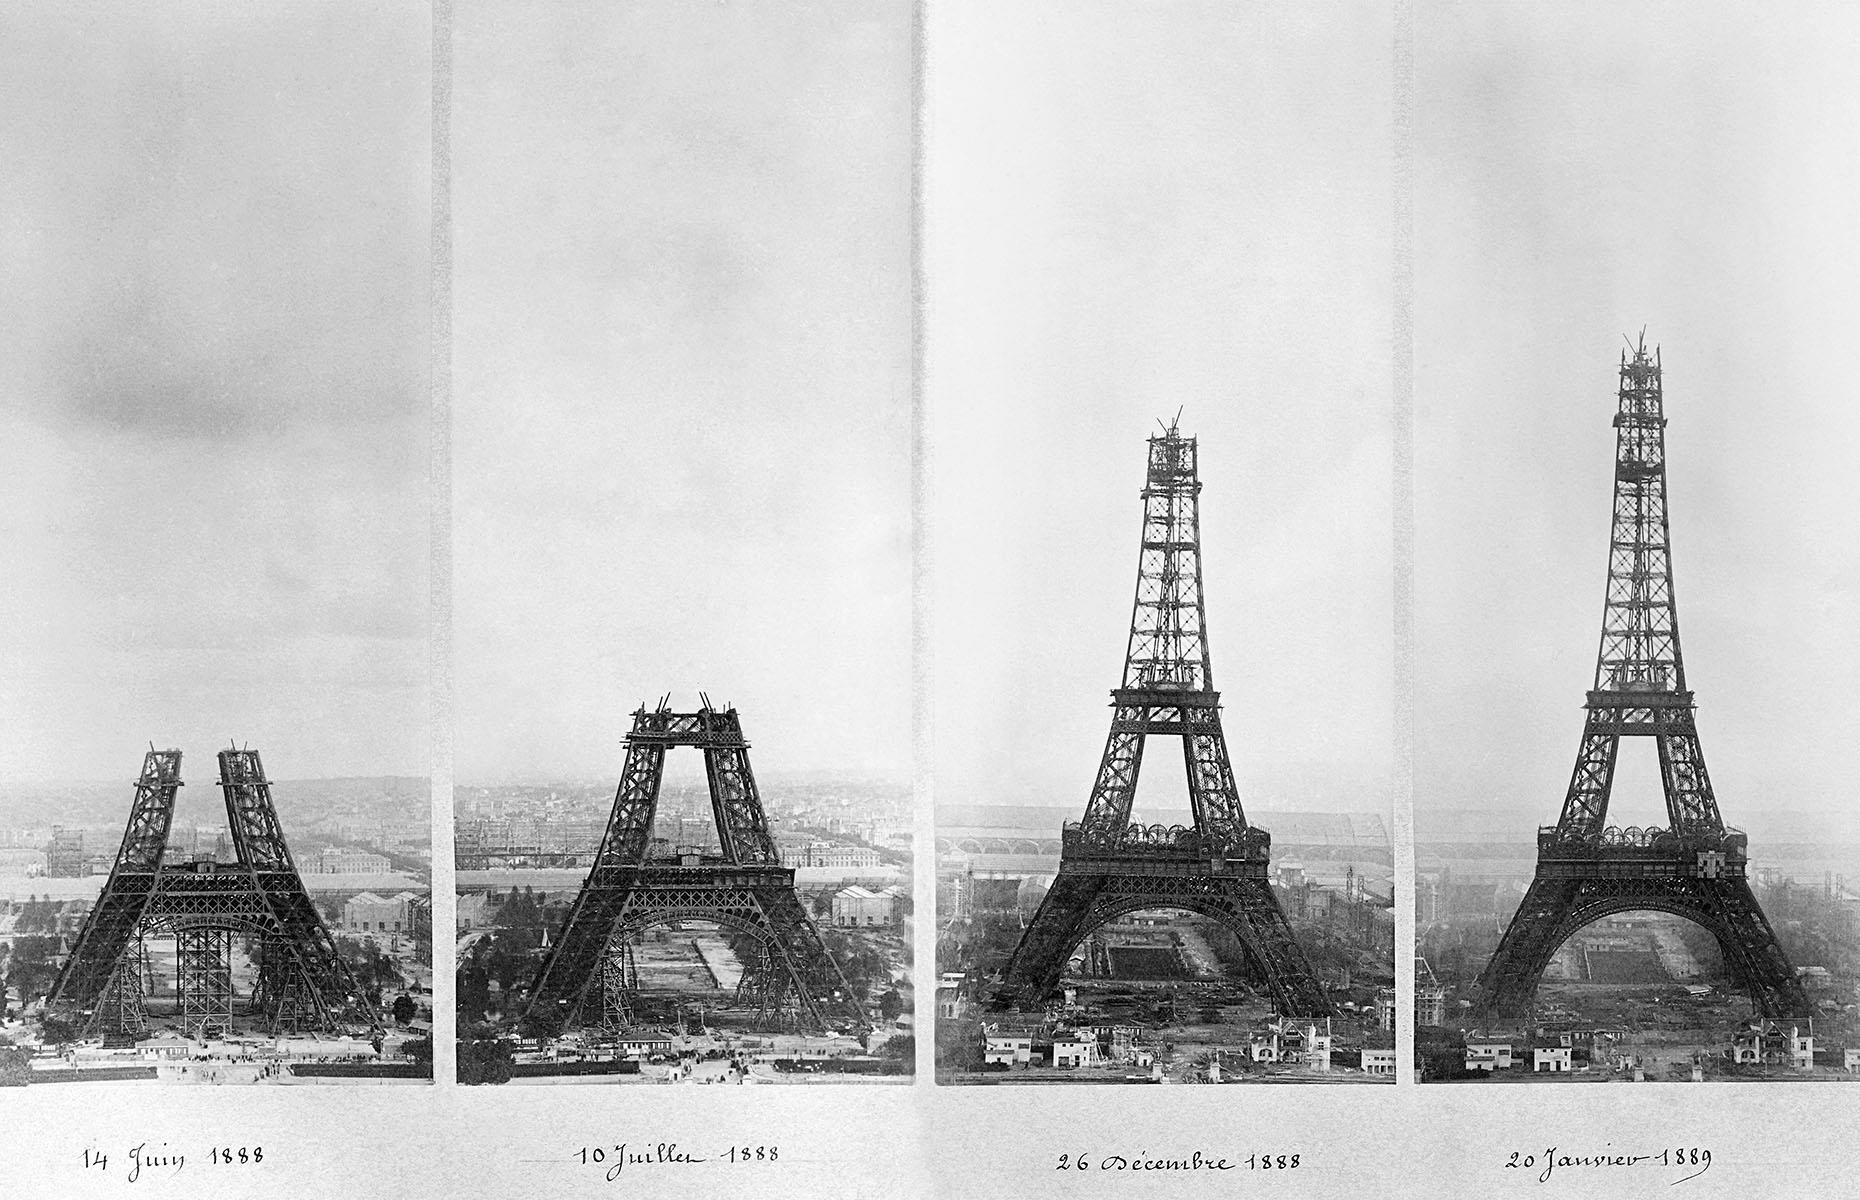 The Eiffel Tower: The Fascinating Story Of The World's Most Famous Landmark